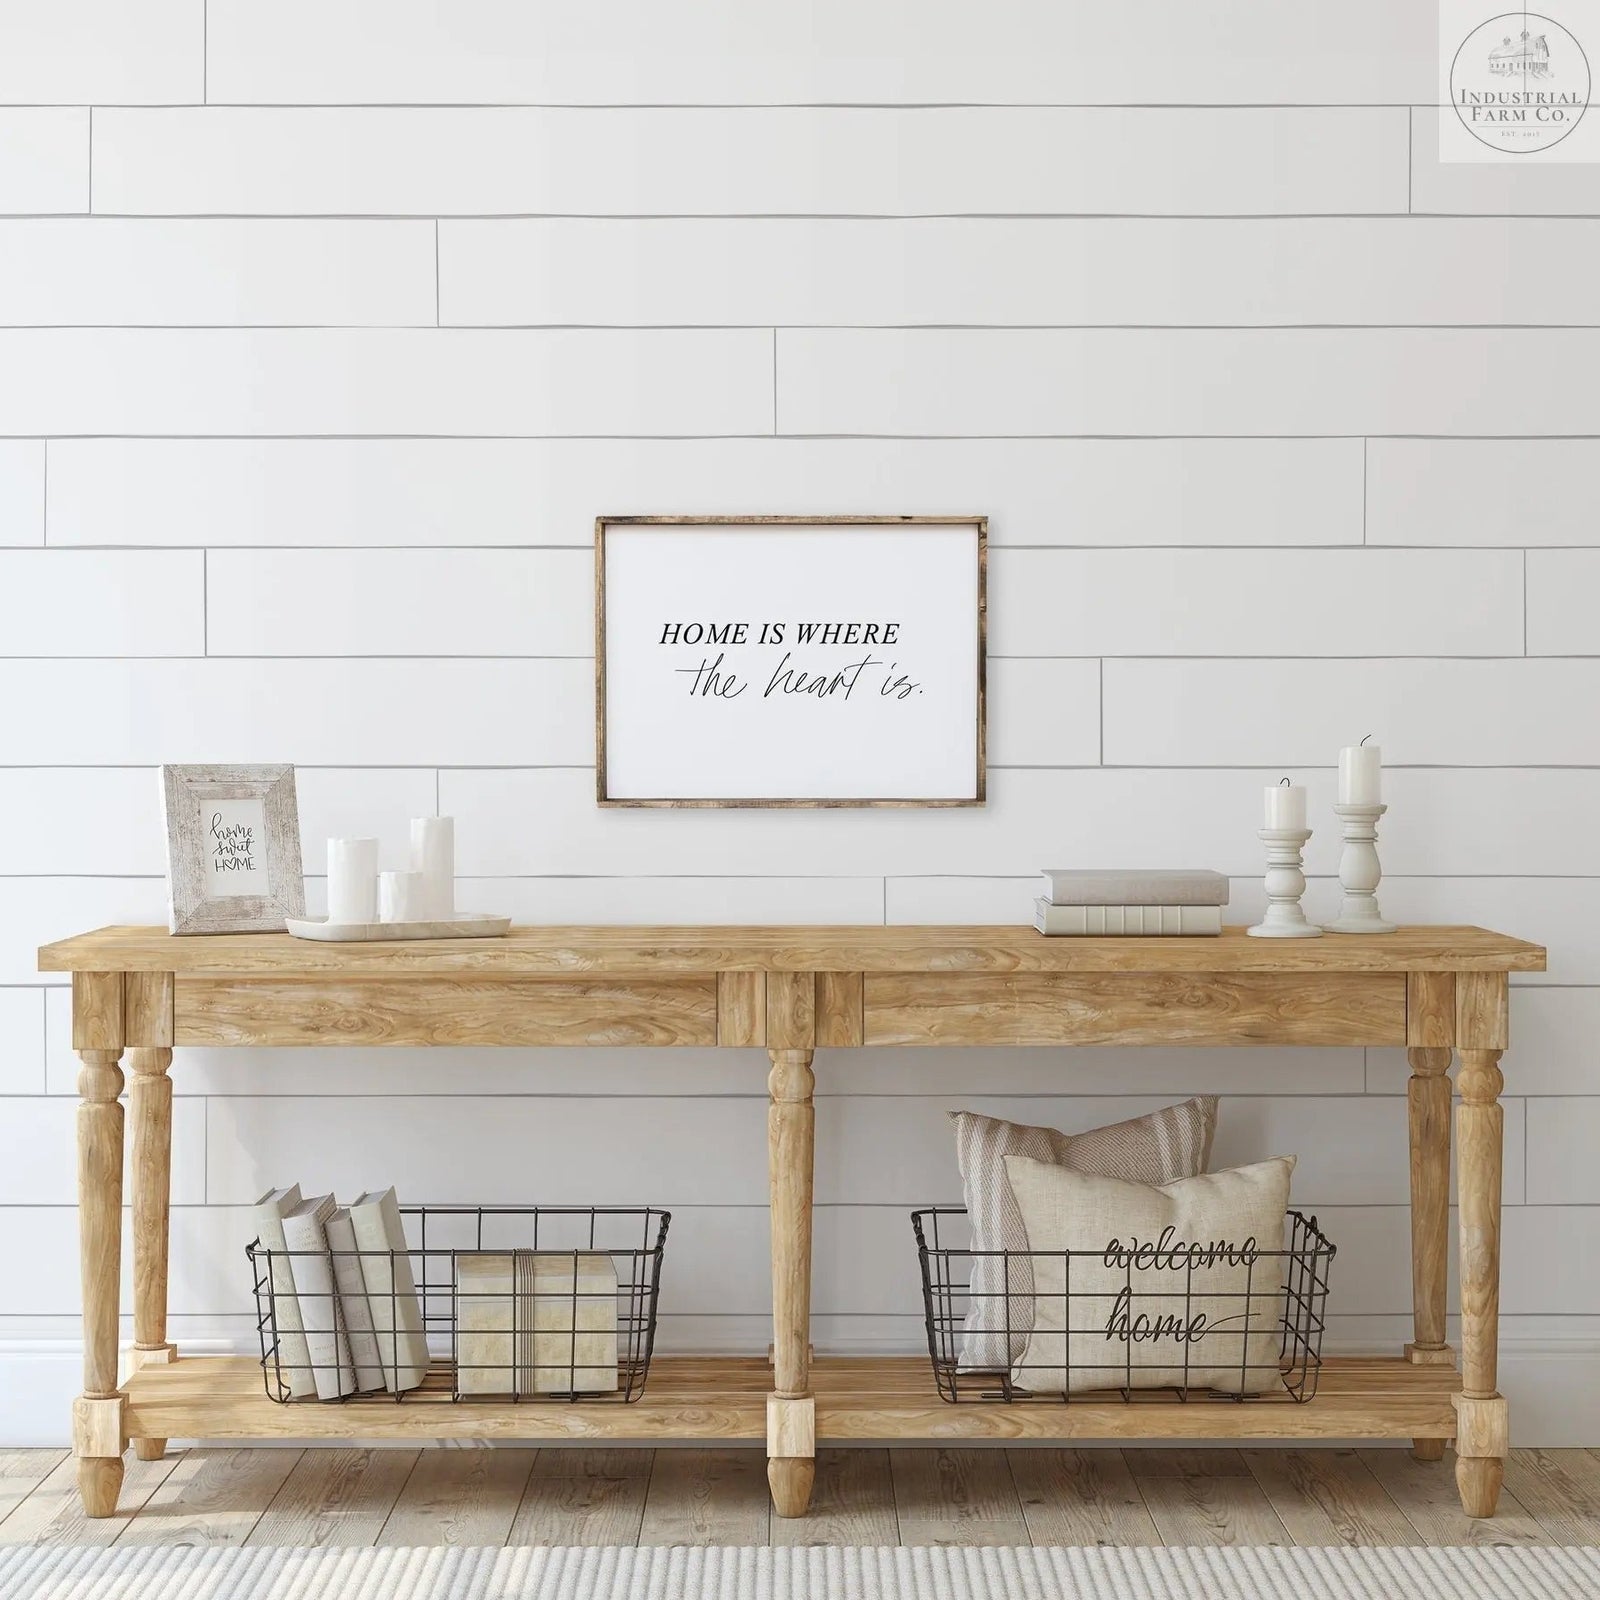 Western Inspired Decor discount, GetQuotenow - Industrial Farm Co